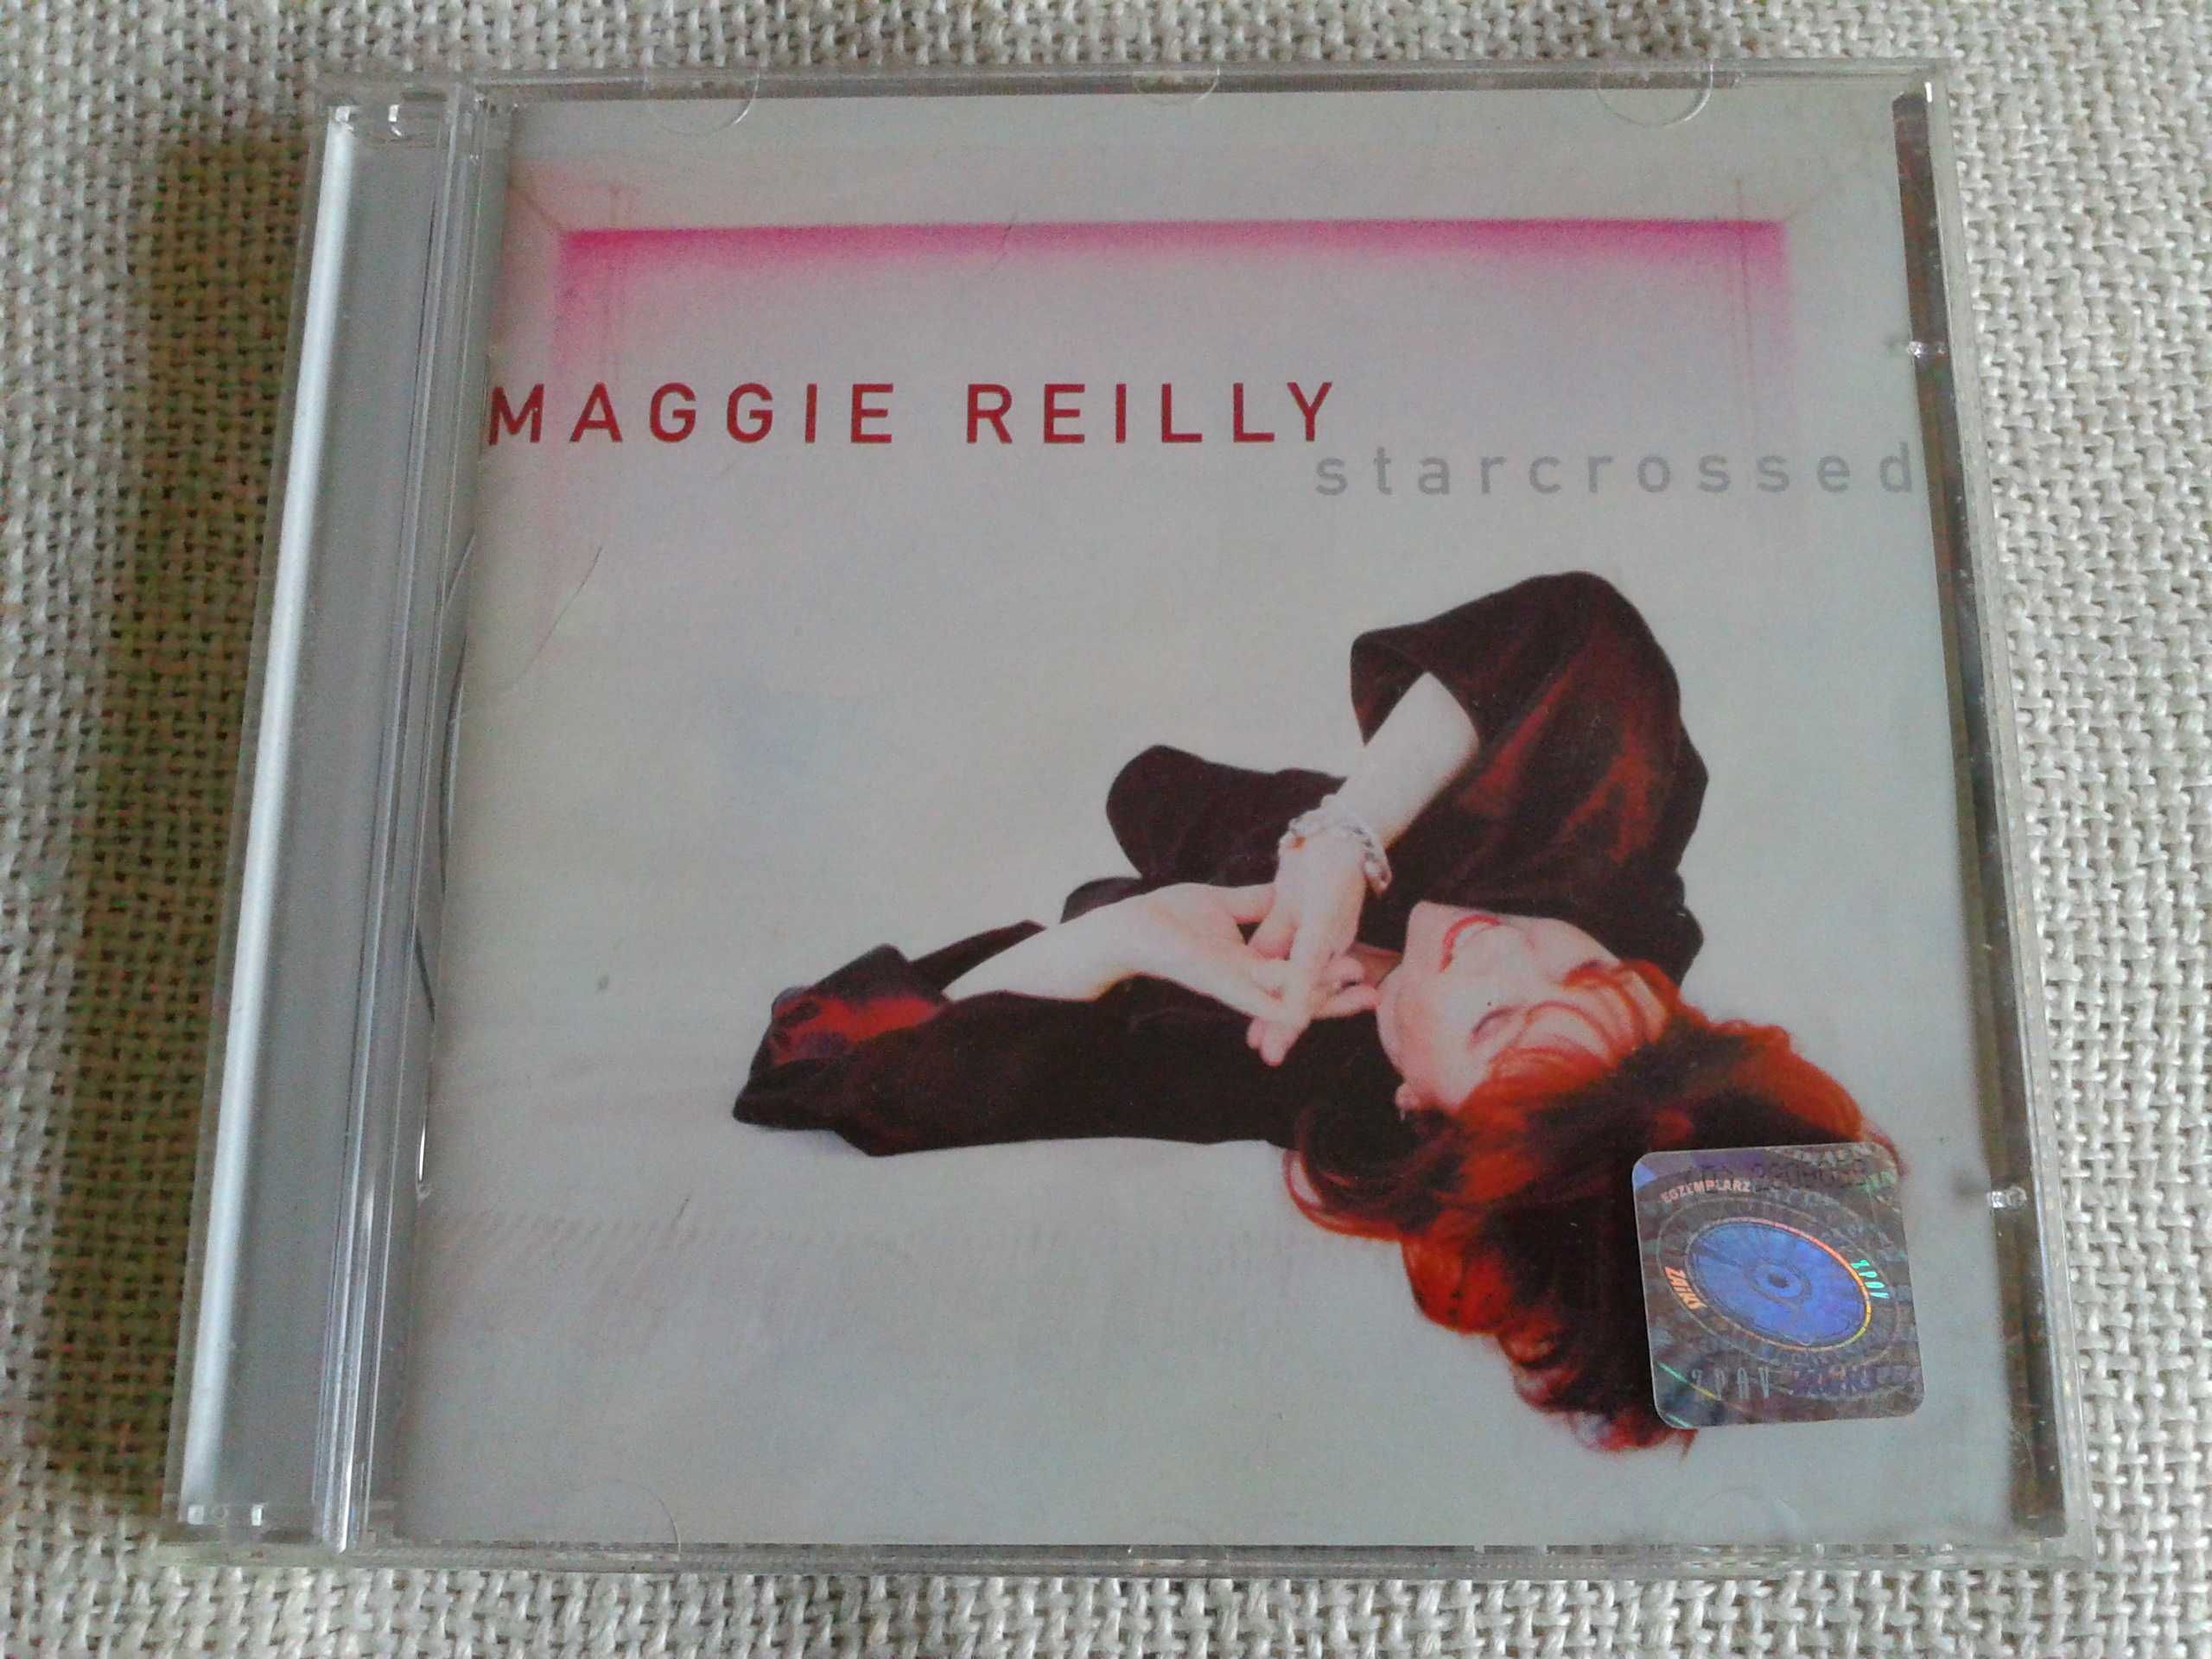 Maggie Reilly - Starcrossed  CD